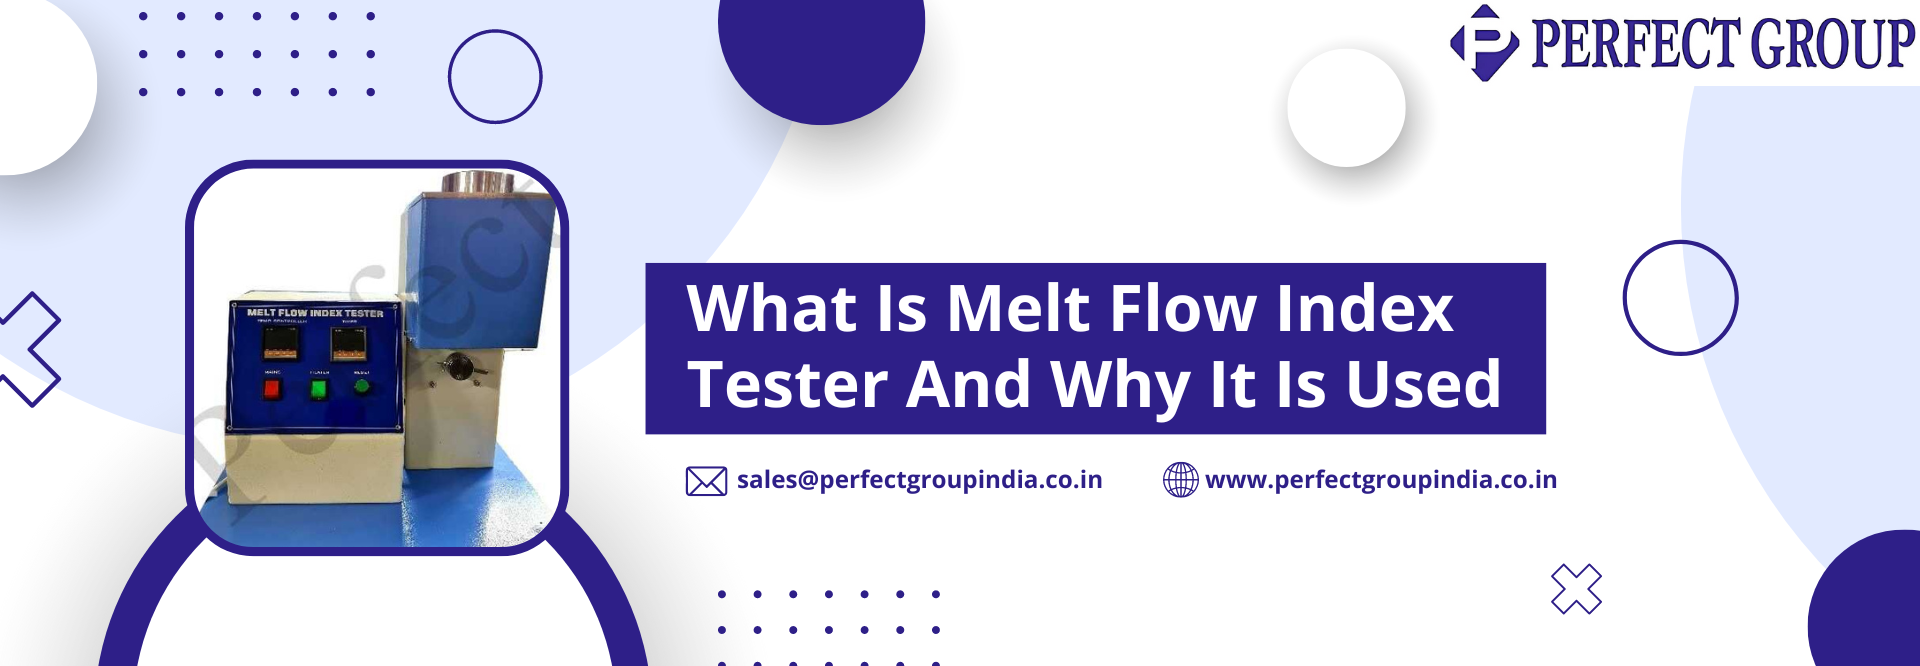 What Is Melt Flow Index Tester And Why It Is Used